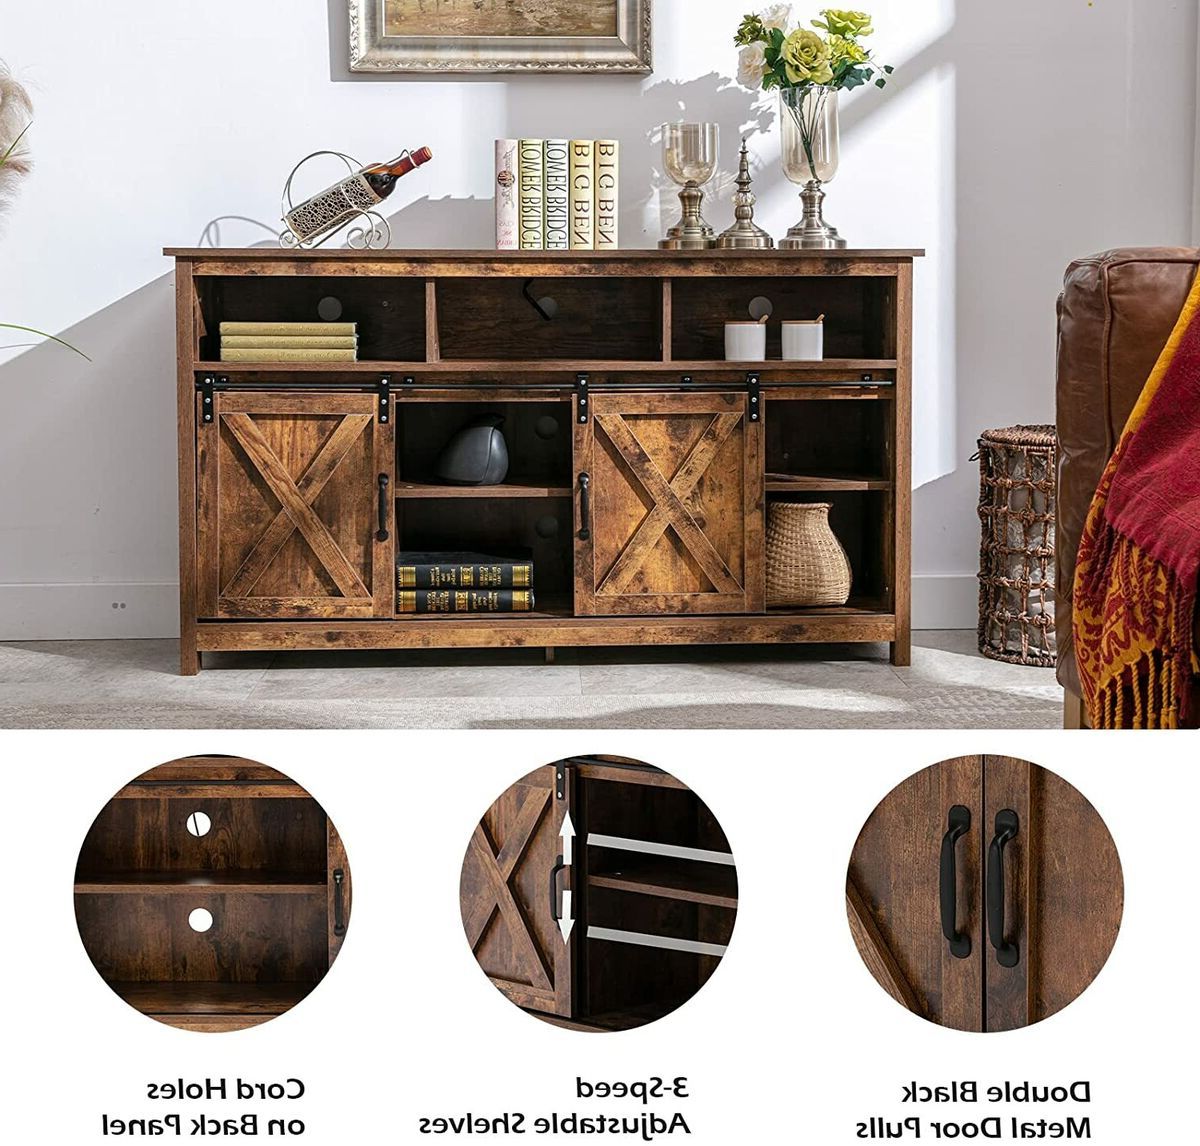 Widely Used Sideboards With Power Outlet Throughout Farmhouse Led Coffee Bar Cabinet Barn Door Sideboard Buffet With Power  Outlet (View 3 of 10)